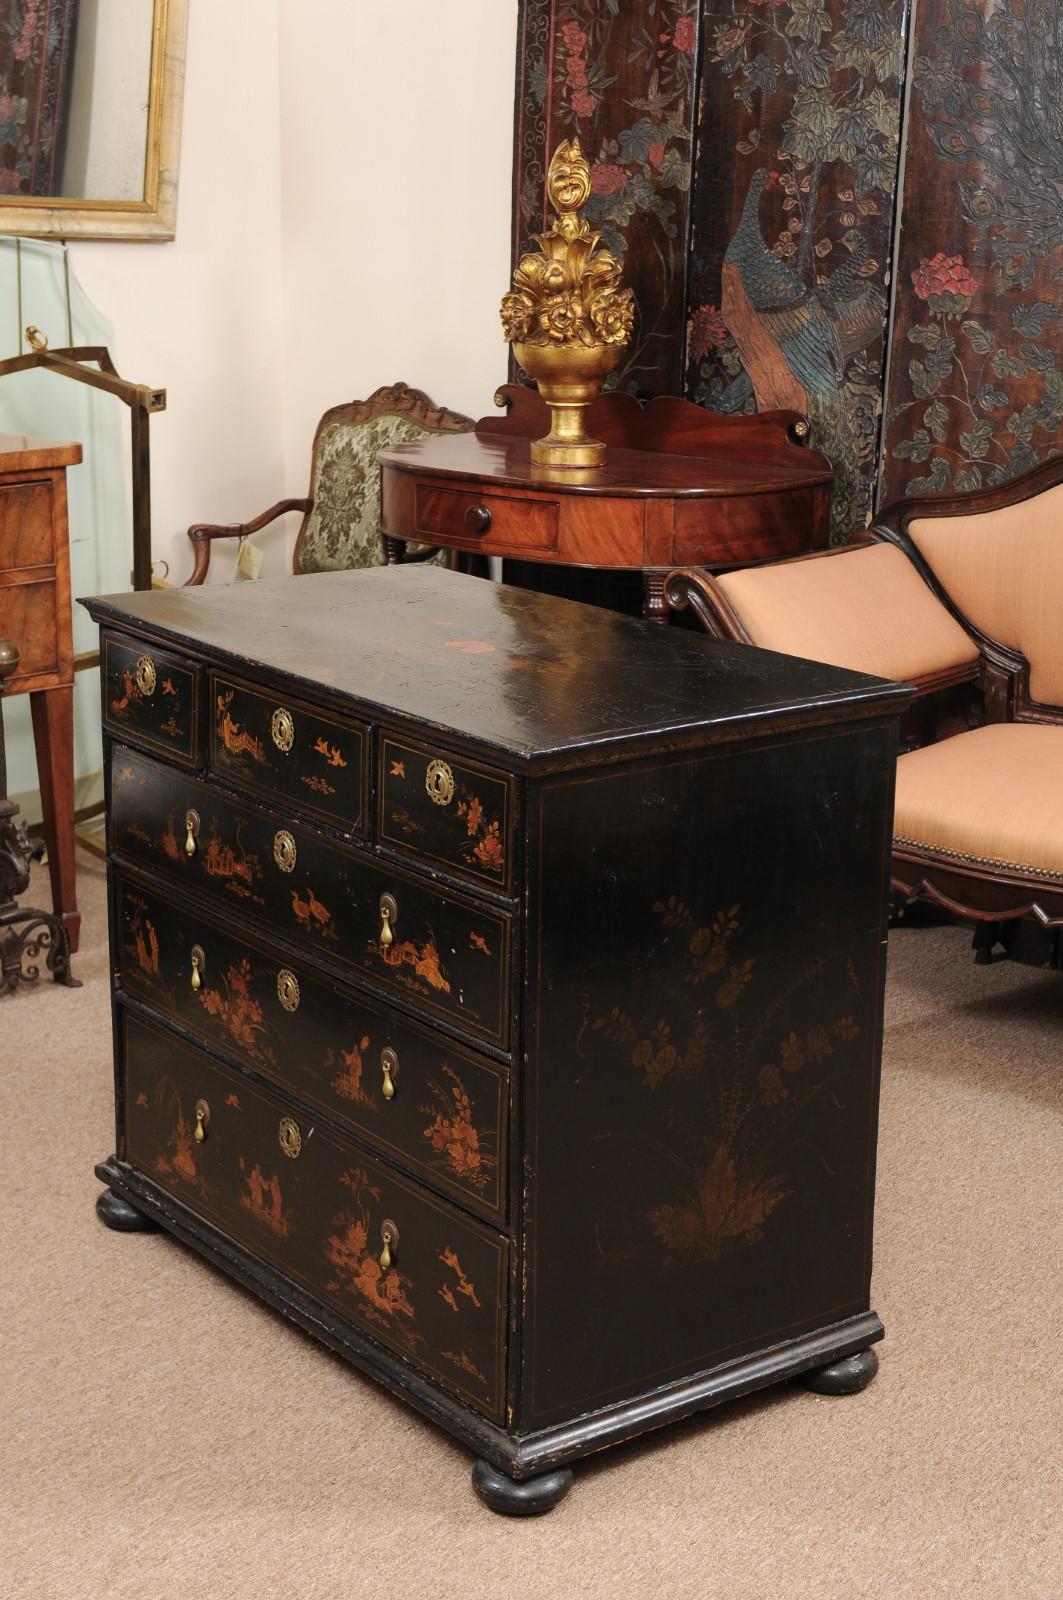 The 18th century black painted chest with chinoiserie design, six drawers with brass pulls and bun feet.

 